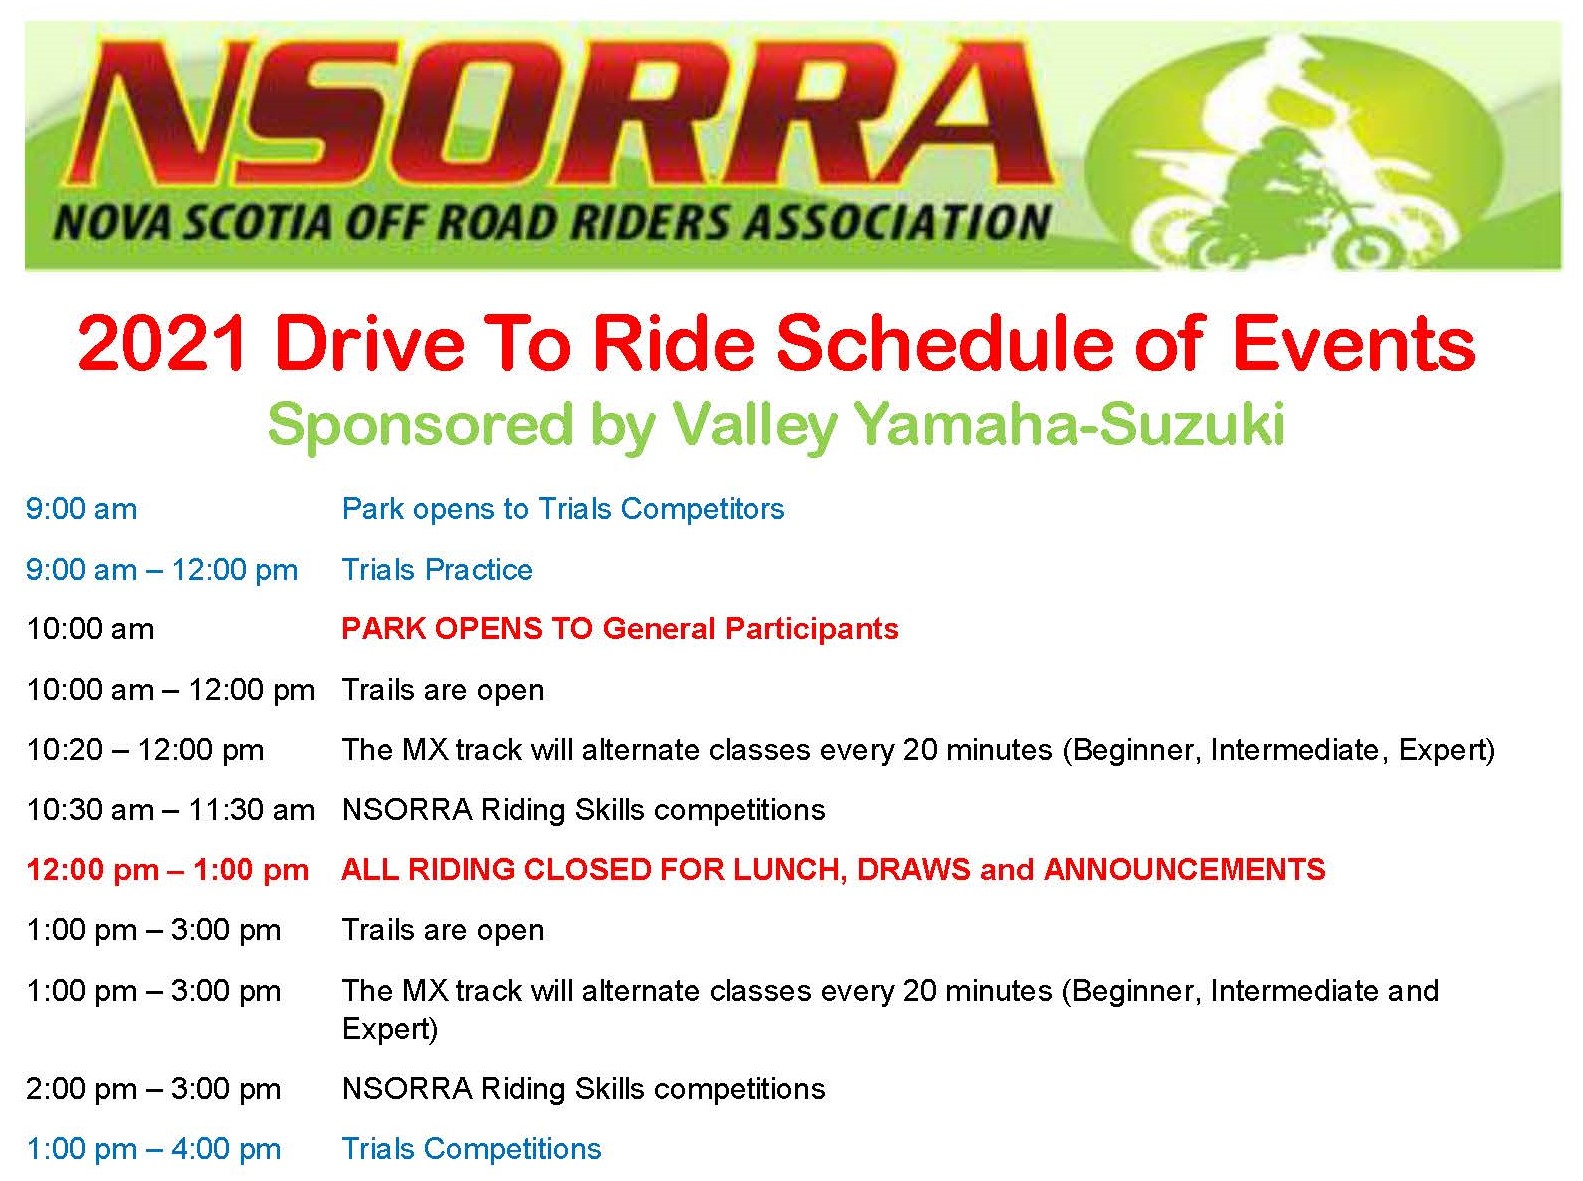 Drive to Ride Schedule